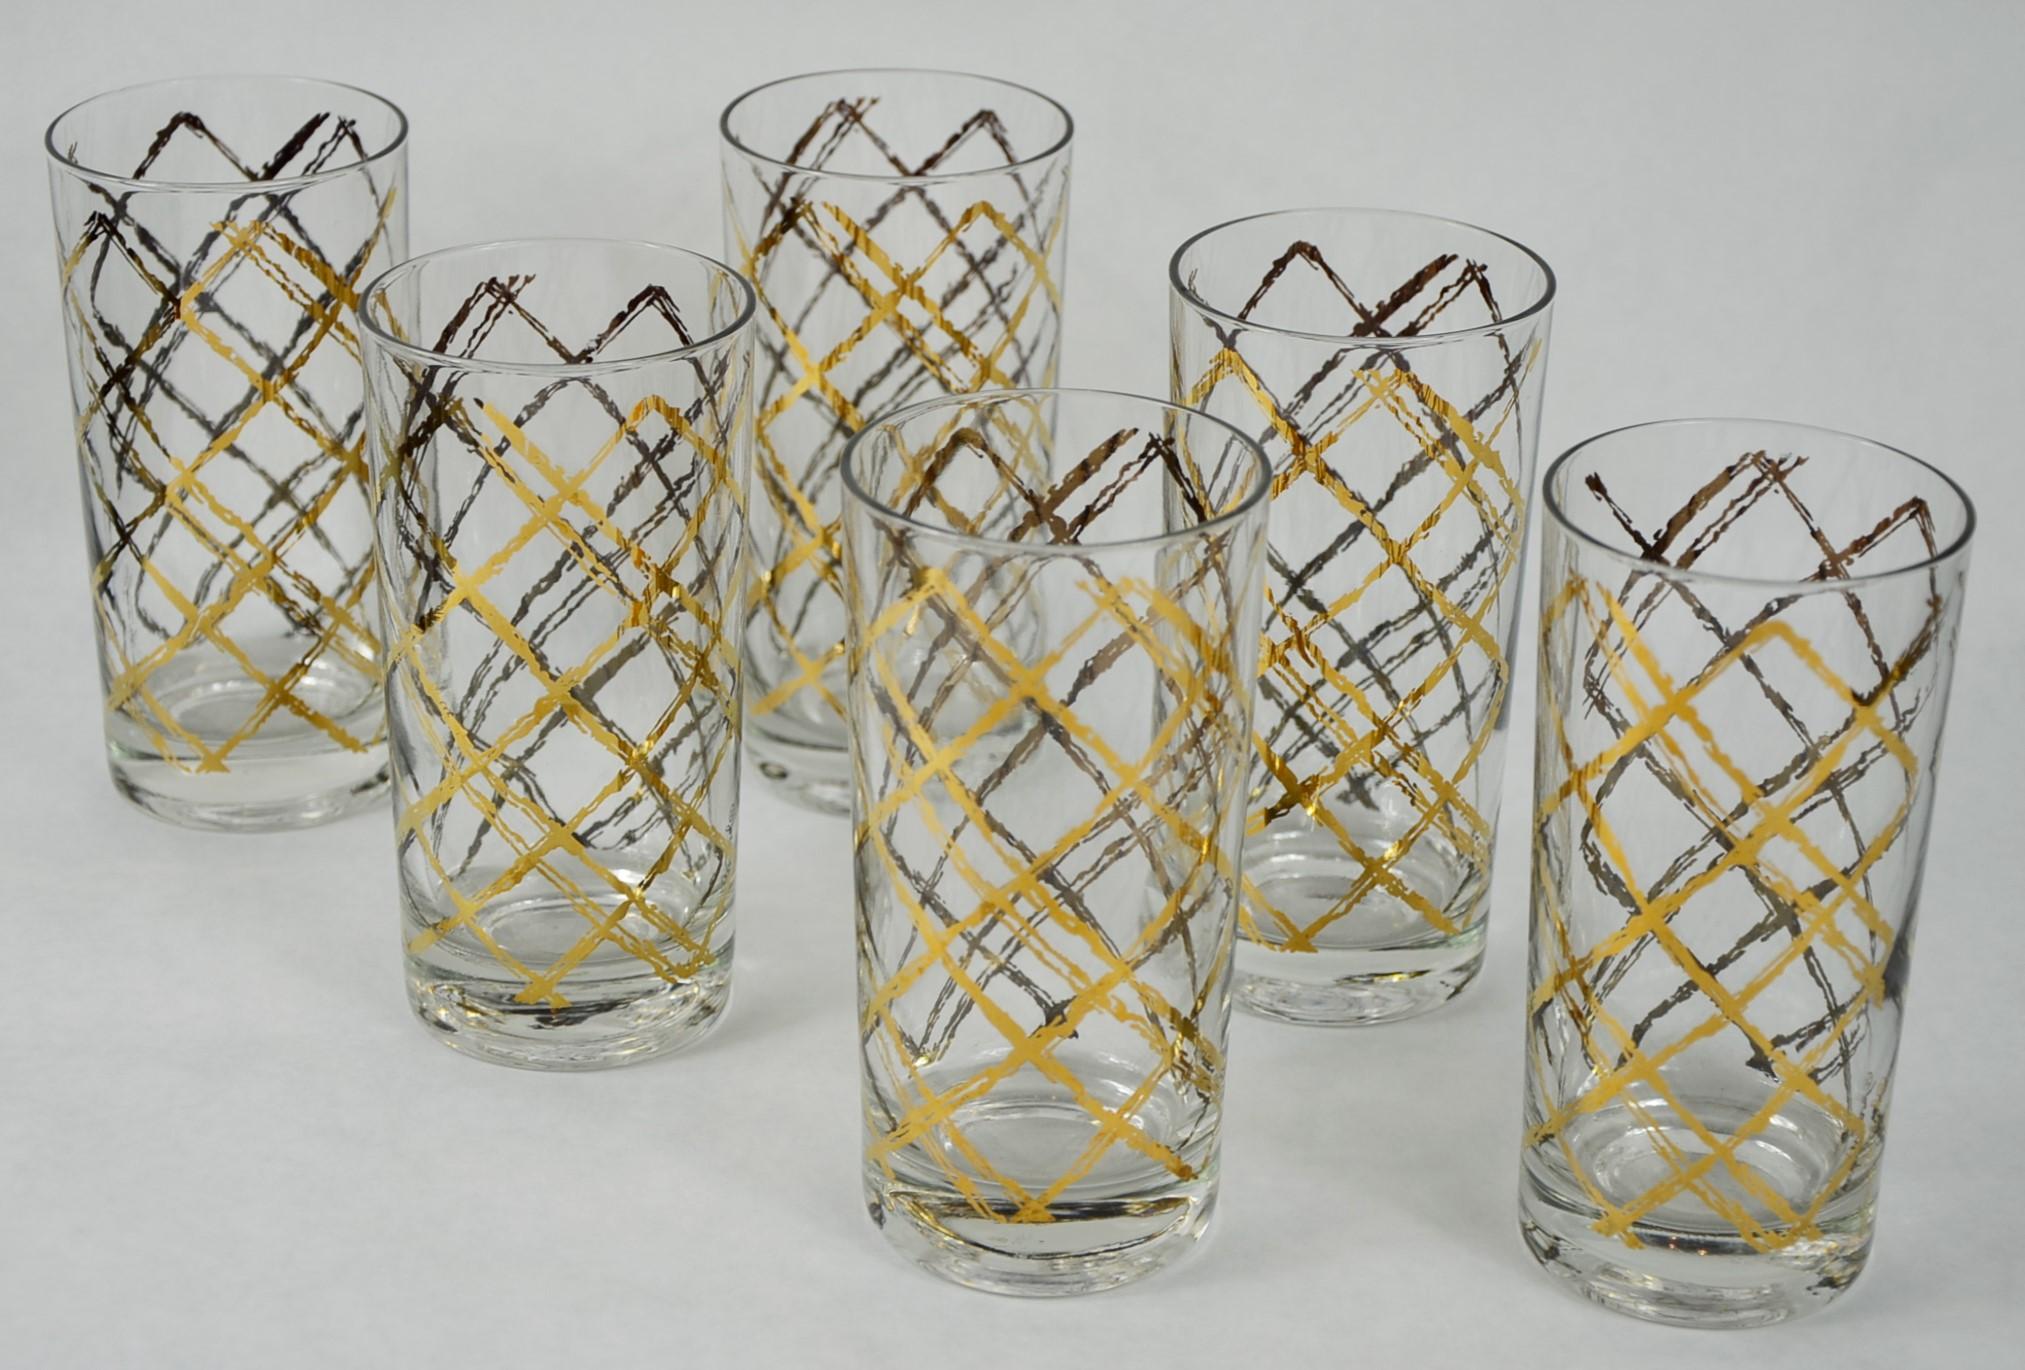 Offered is a set of six Mid-Century Modern Georges Briard clear glass with cross hatch gold and copper gilt overlay pattern tall Tom Collins cocktail glasses. Fabulous cocktail glasses for entertaining or as the perfect gift. The gilt gold and